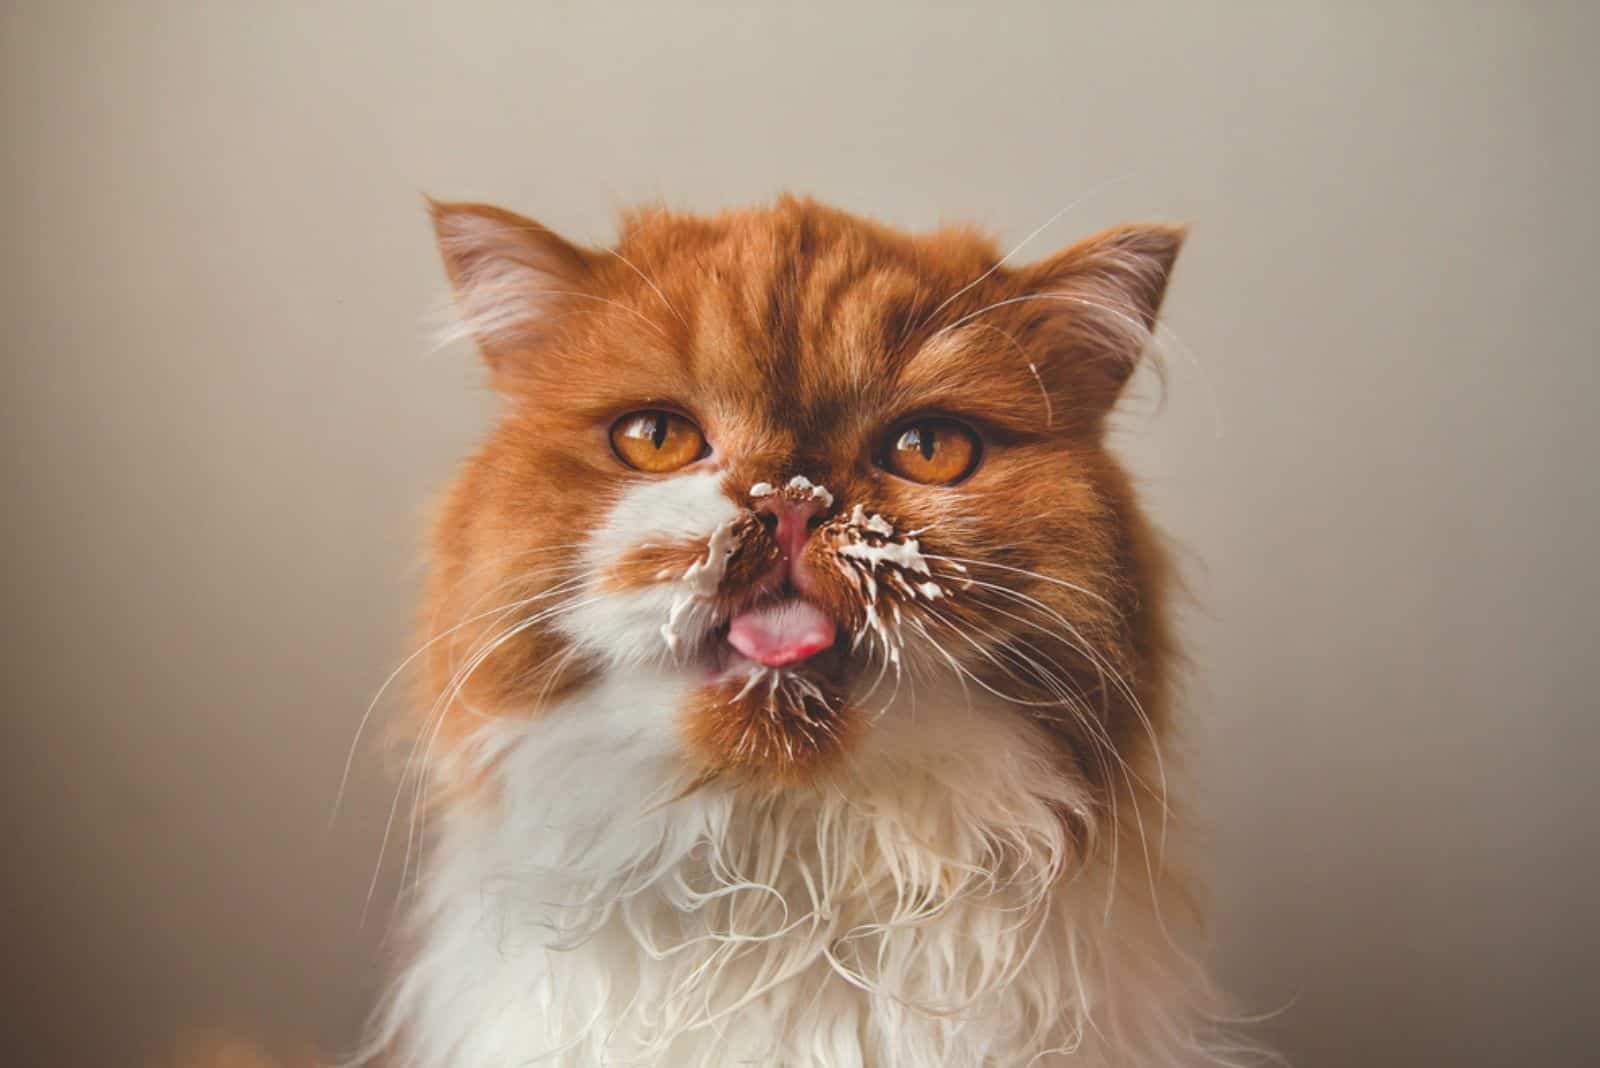 A fluffy ginger cat licks sour cream from its face